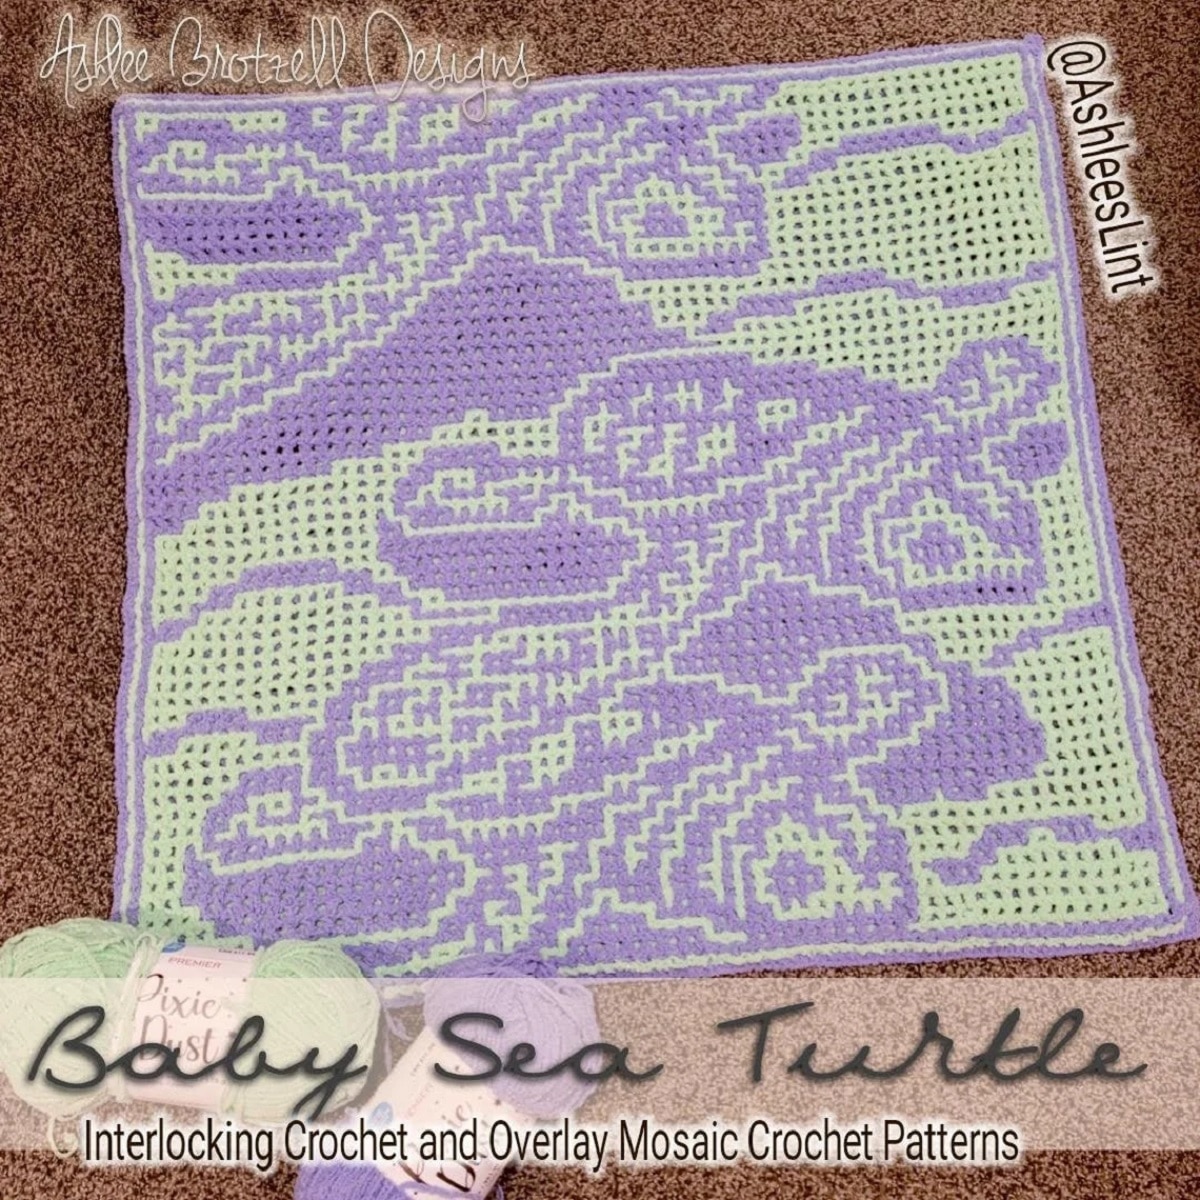 Green crochet blanket with purple sea turtles stitched on the top lying on a brown carpet.